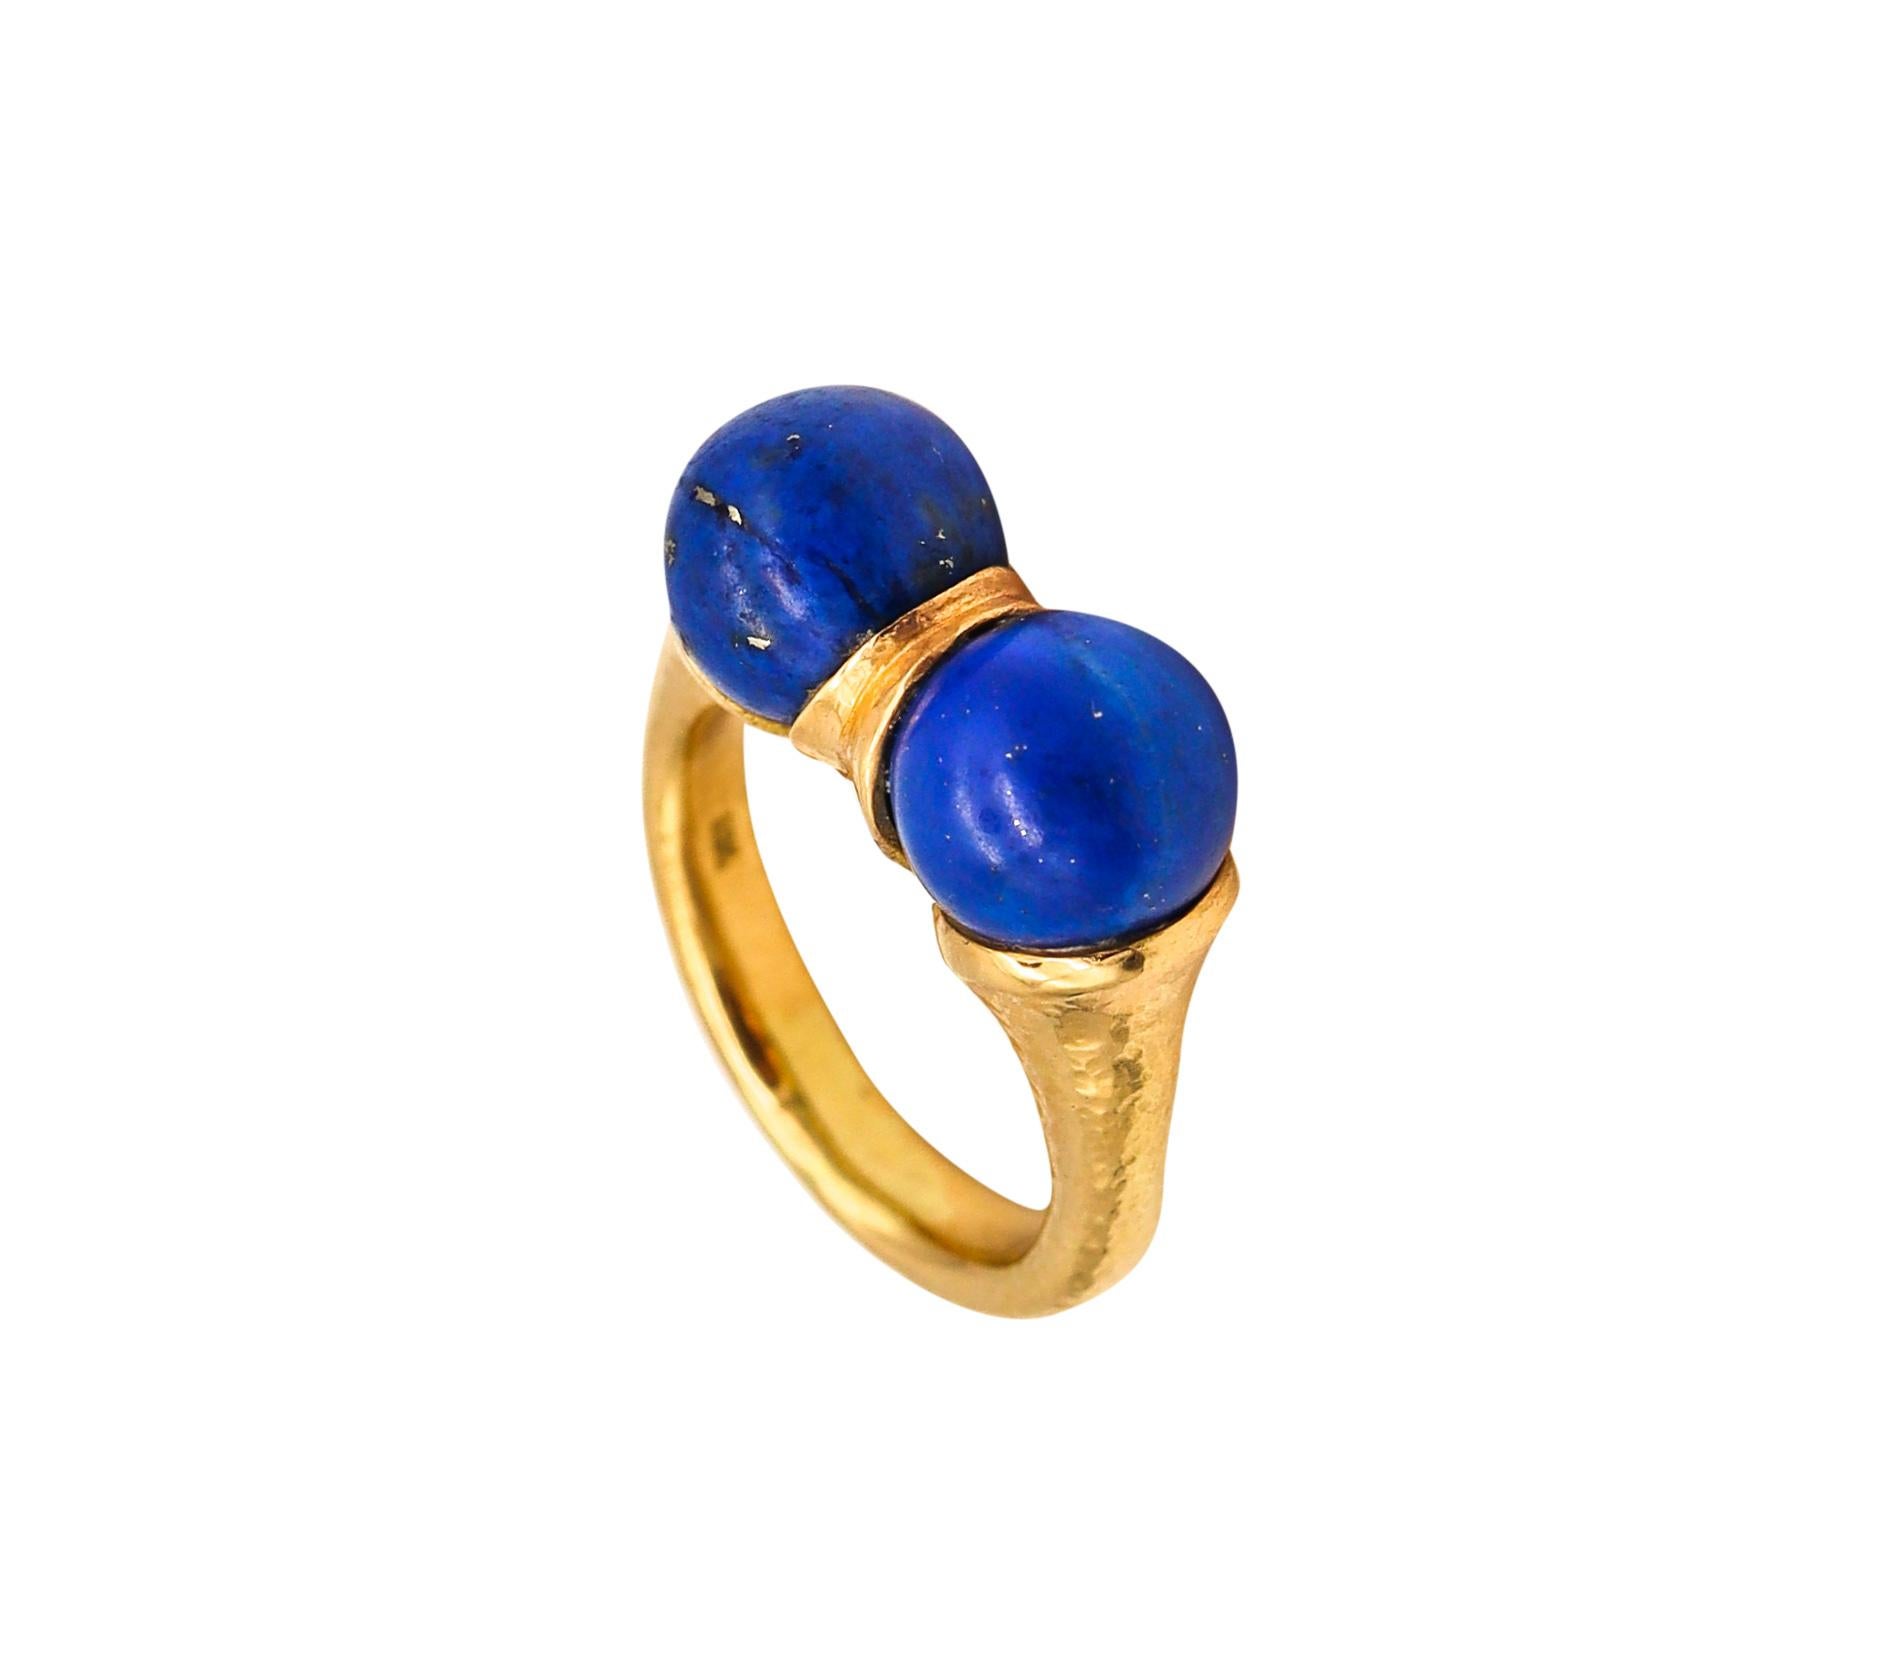 Modernist Sculptural Greek Ring in Hammered 18Kt Yellow Gold with Lapis Lazuli In Excellent Condition For Sale In Miami, FL